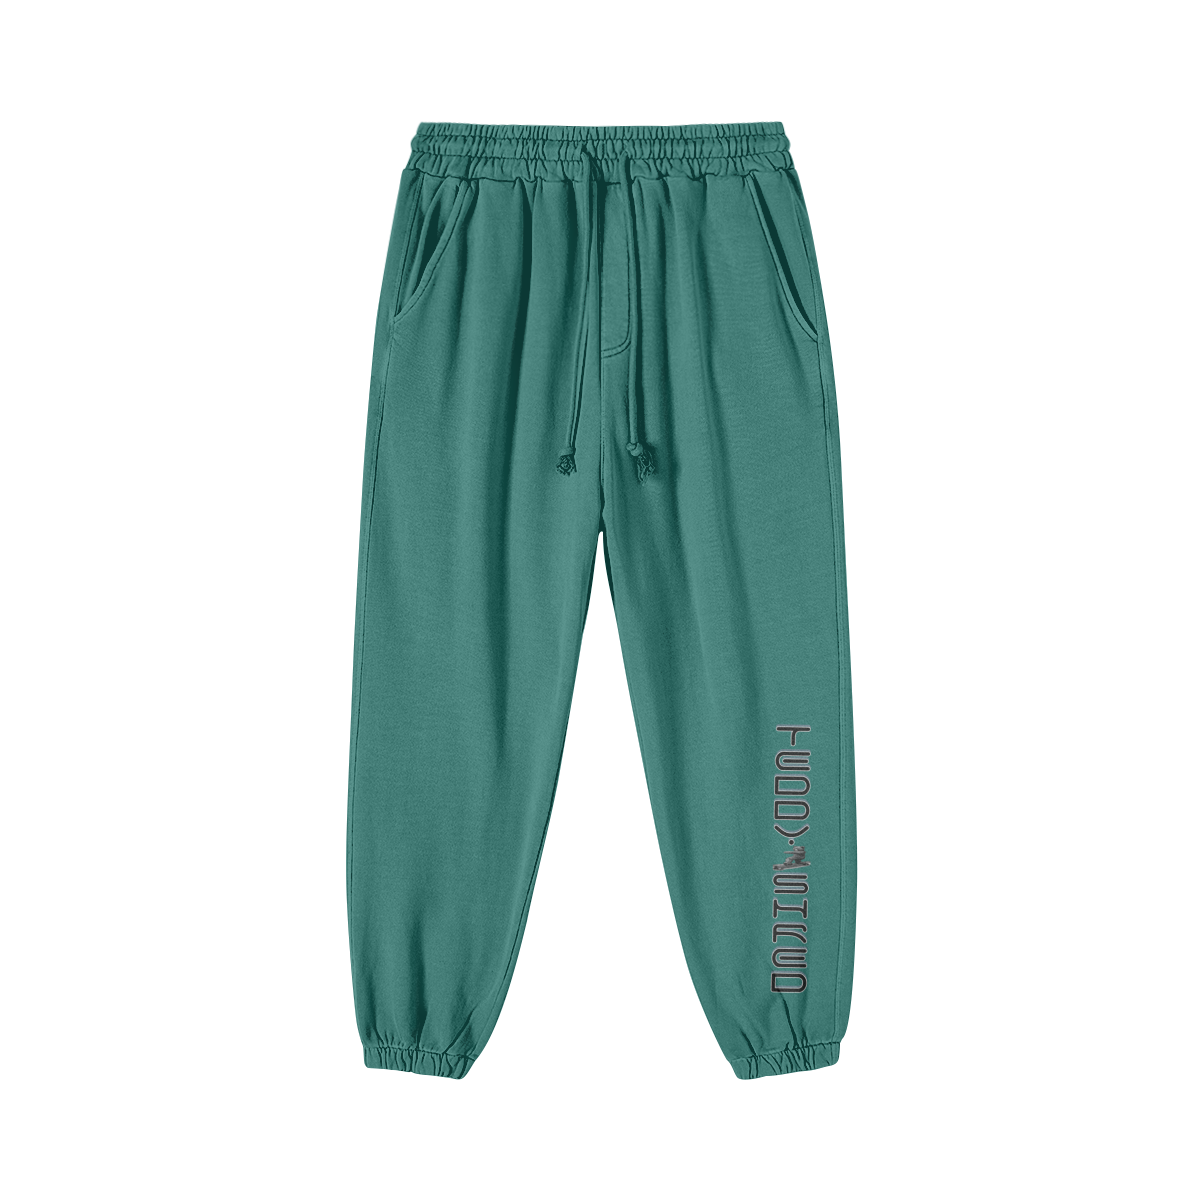 Wintergreen Dream Teddy Ride Shred 420GSM Unisex Super Heavyweight Washed Baggy Sweatpants - unisex sweatpants at TFC&H Co.